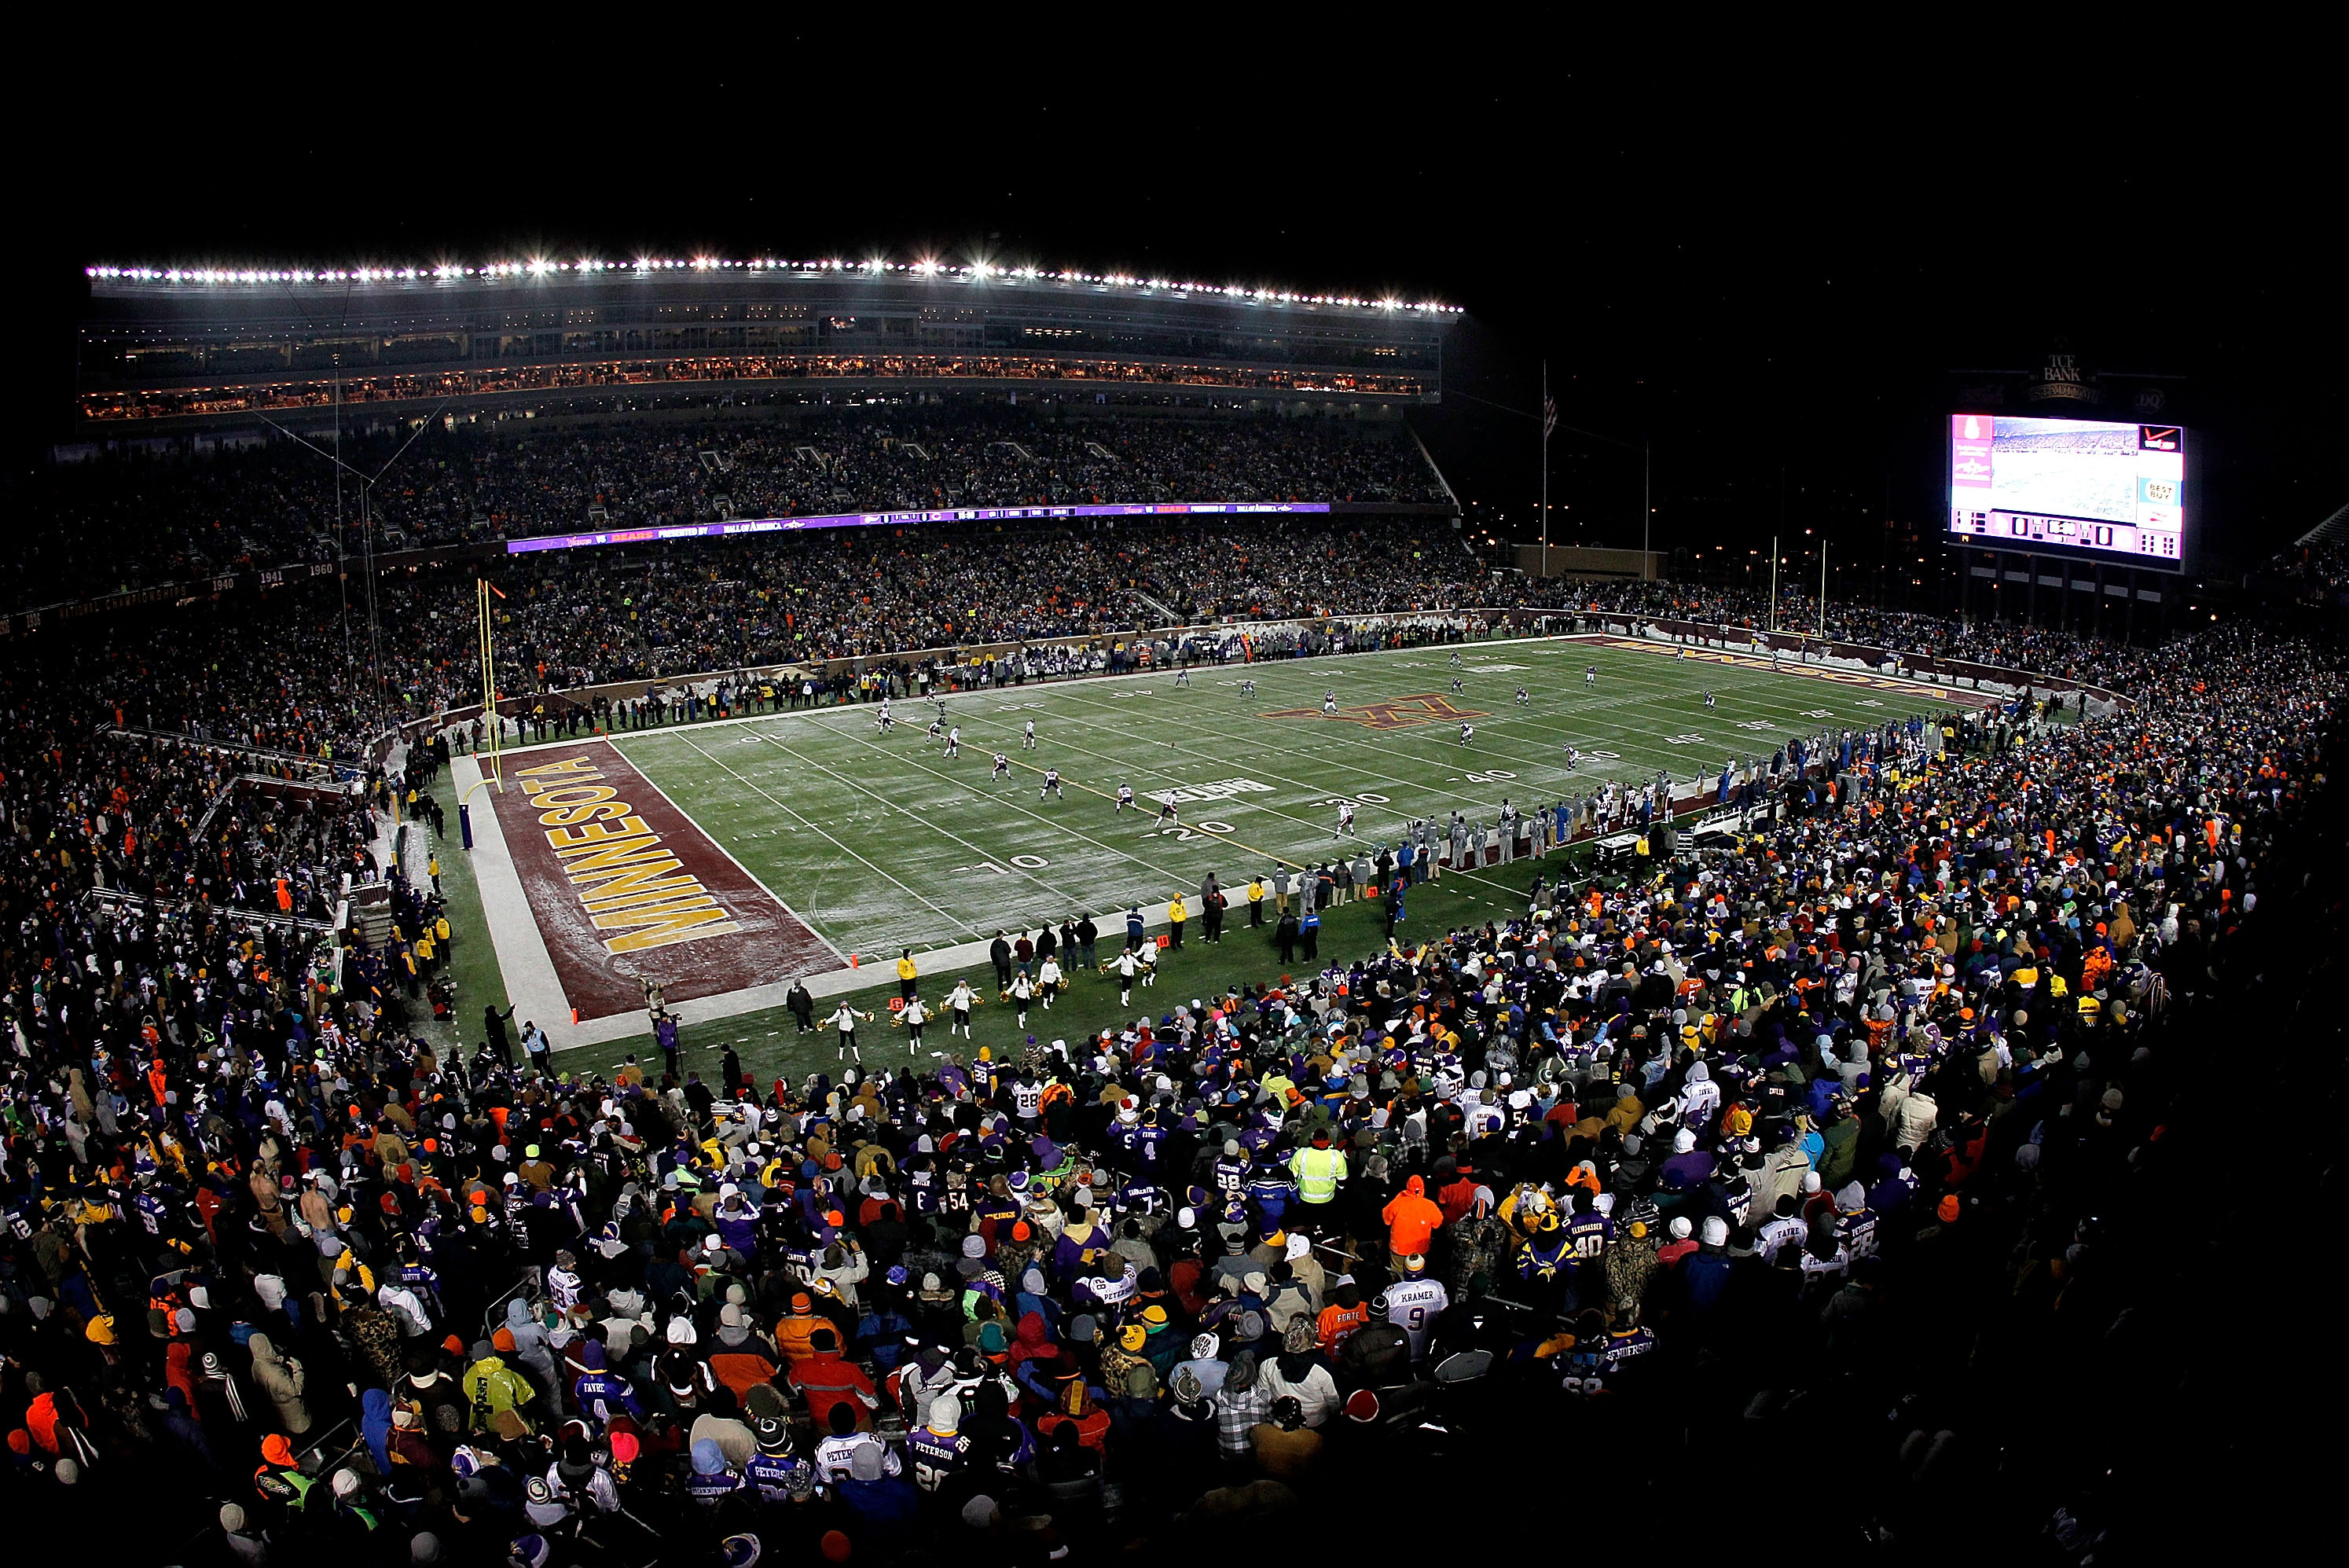 Minnesota Golden Gophers: What the New Vikings Stadium Means to